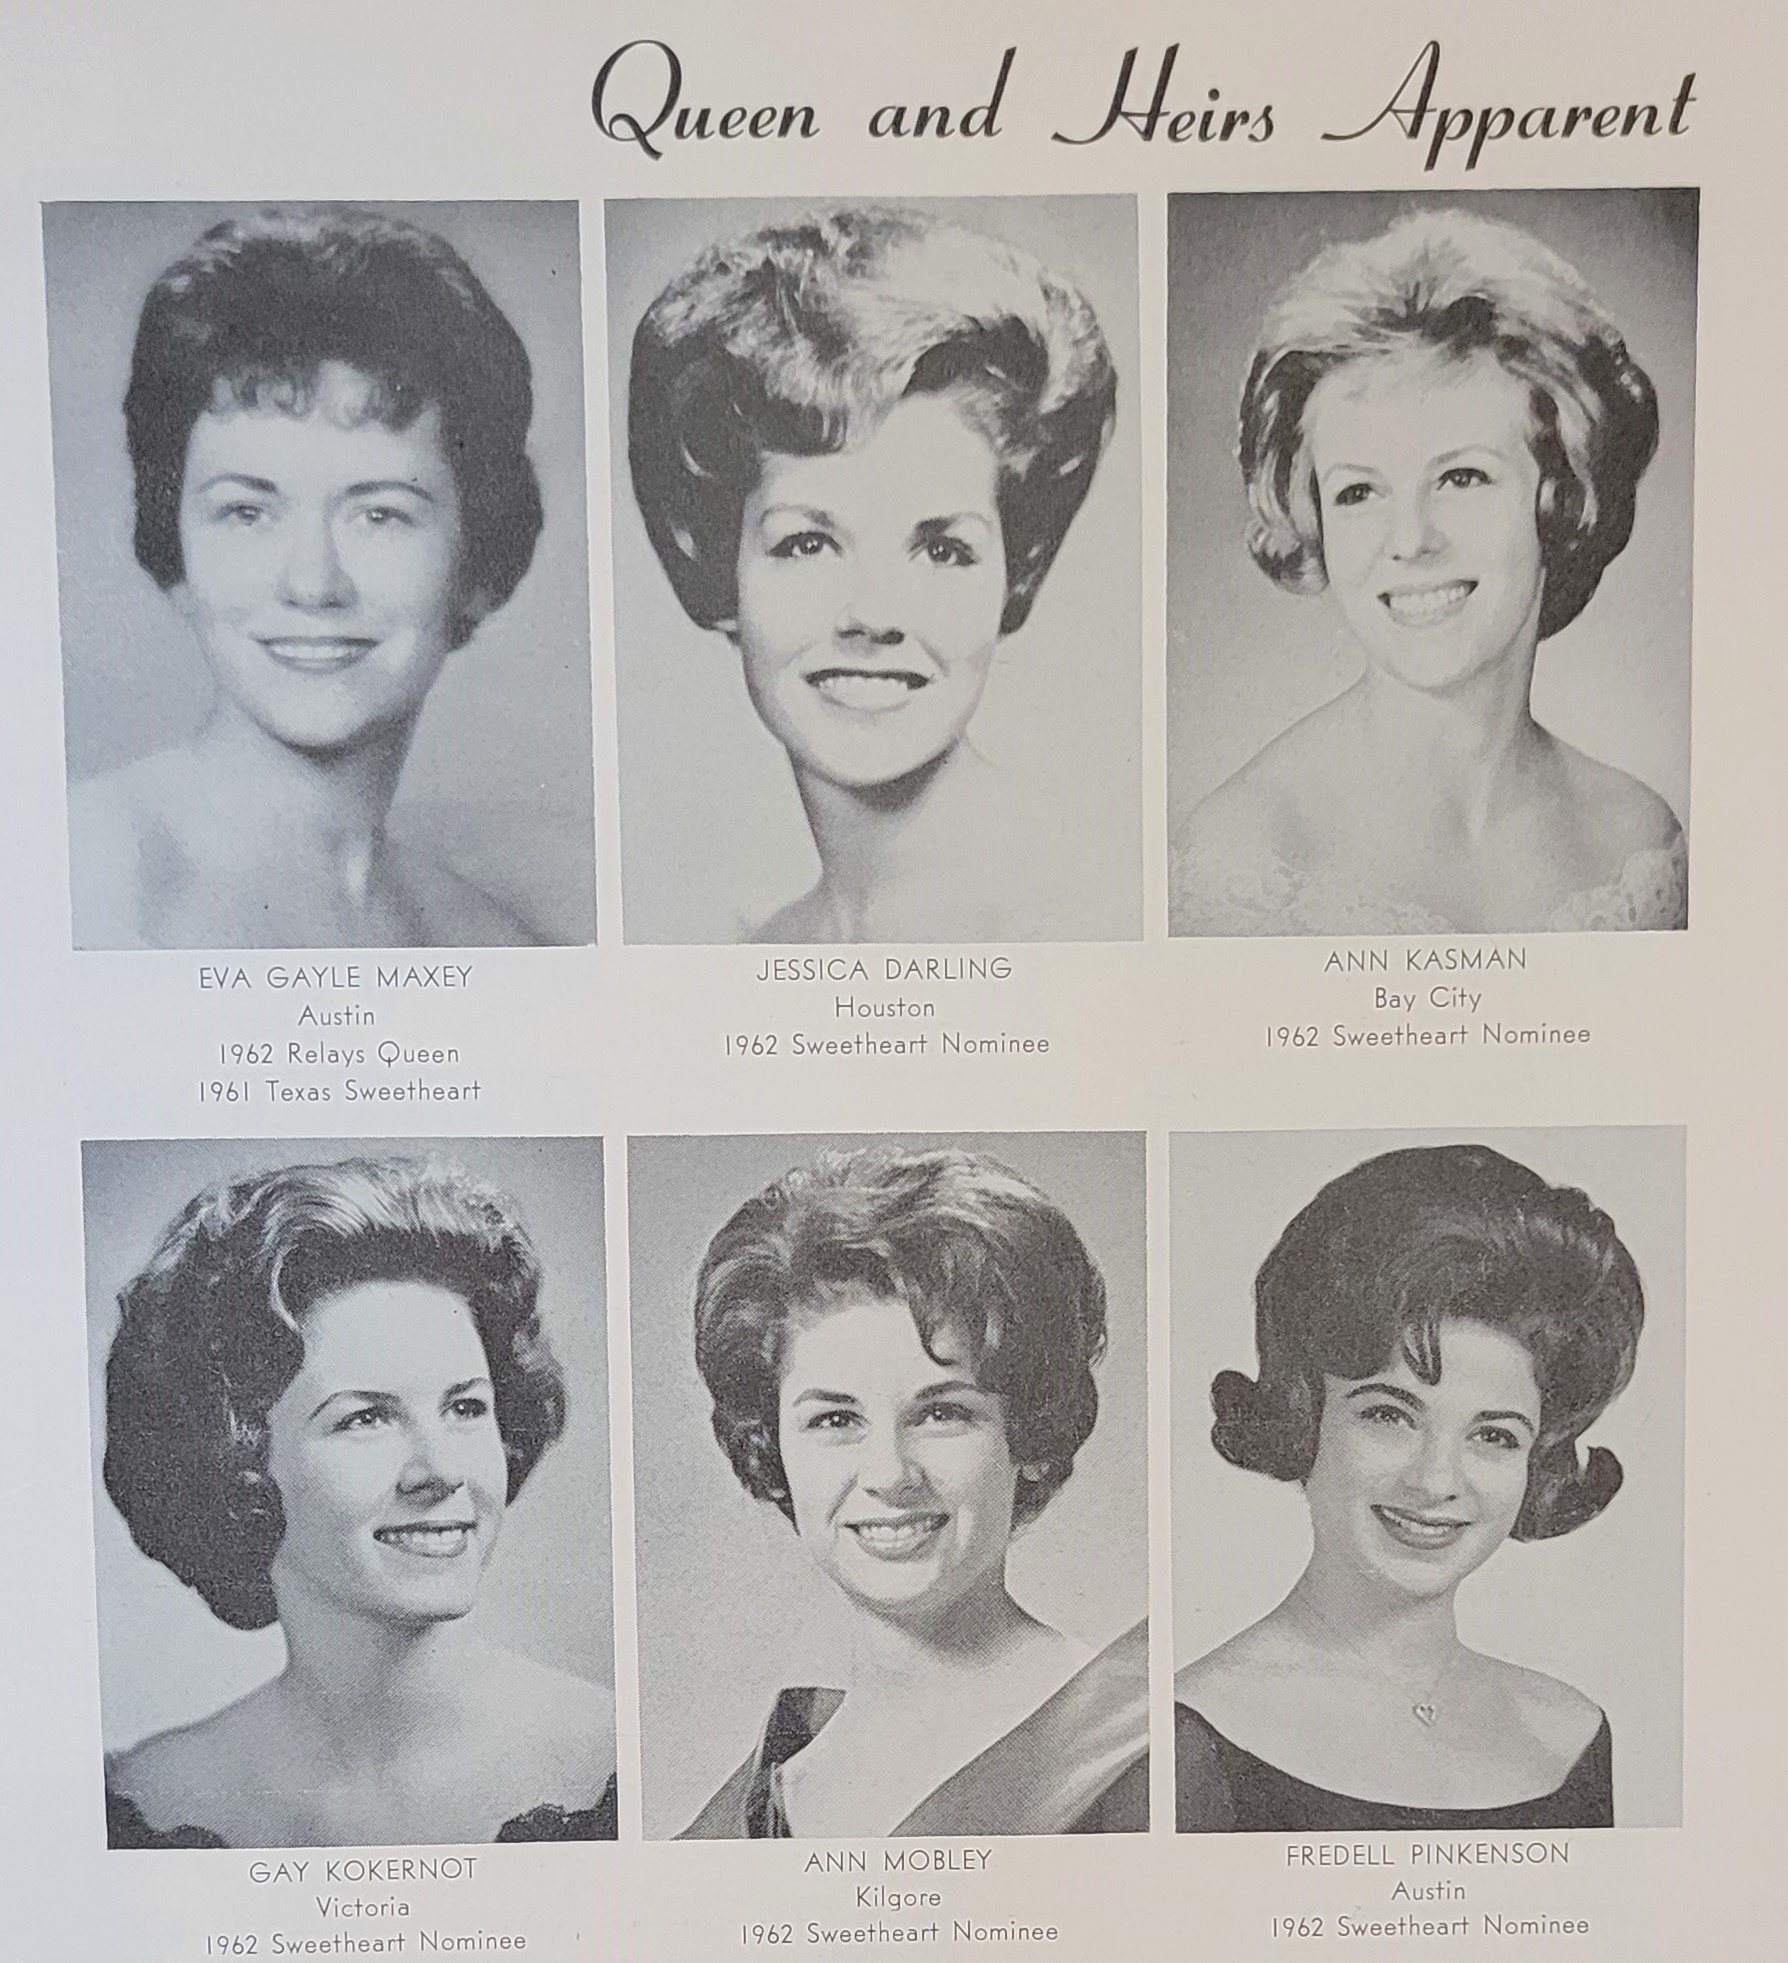 1962 - Queen and Heirs Apparent